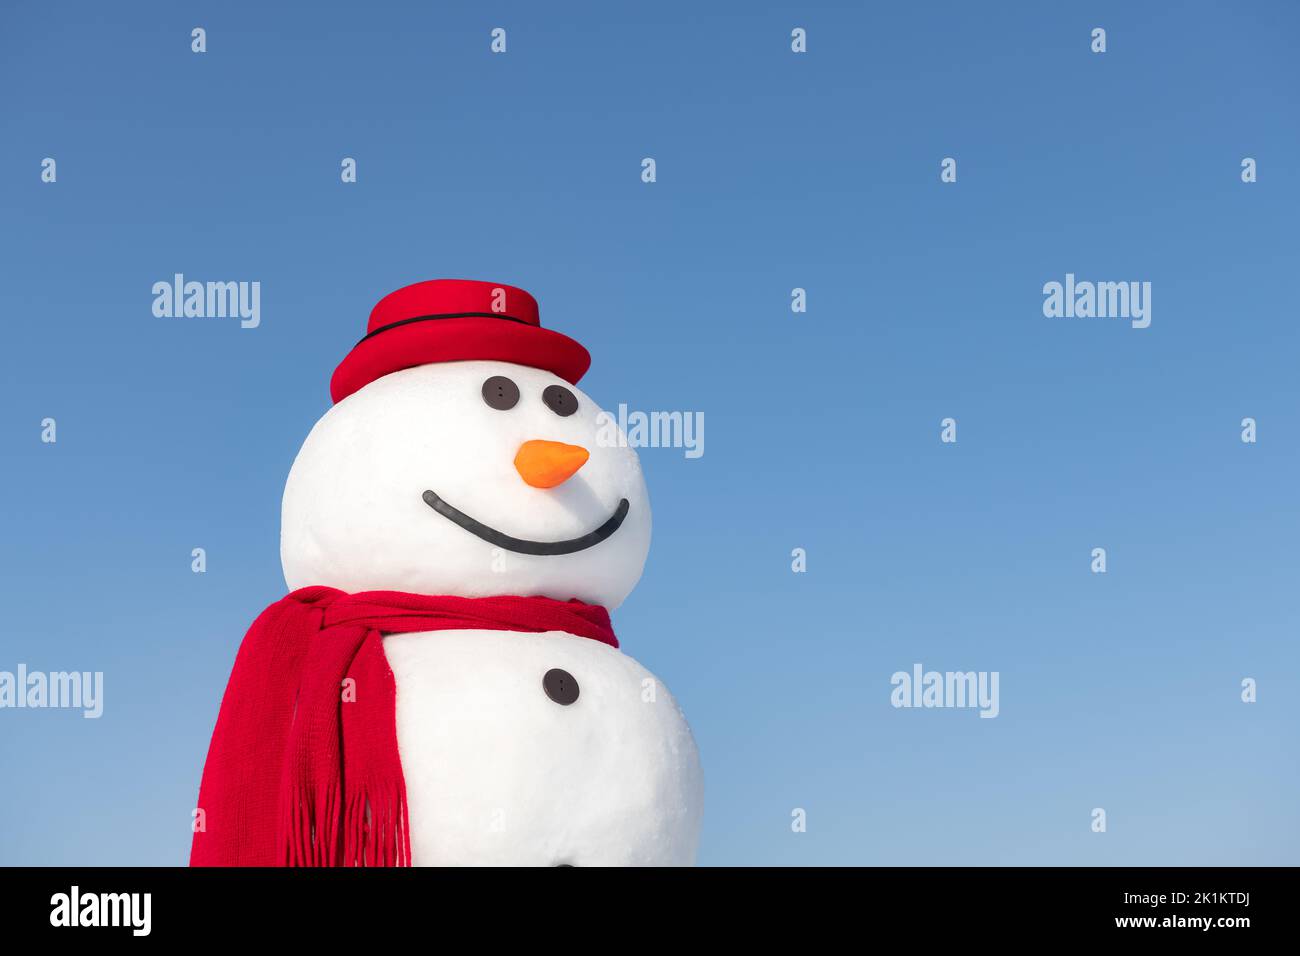 Funny snowman in stylish red hat and red scalf closeup on blue sky background Stock Photo